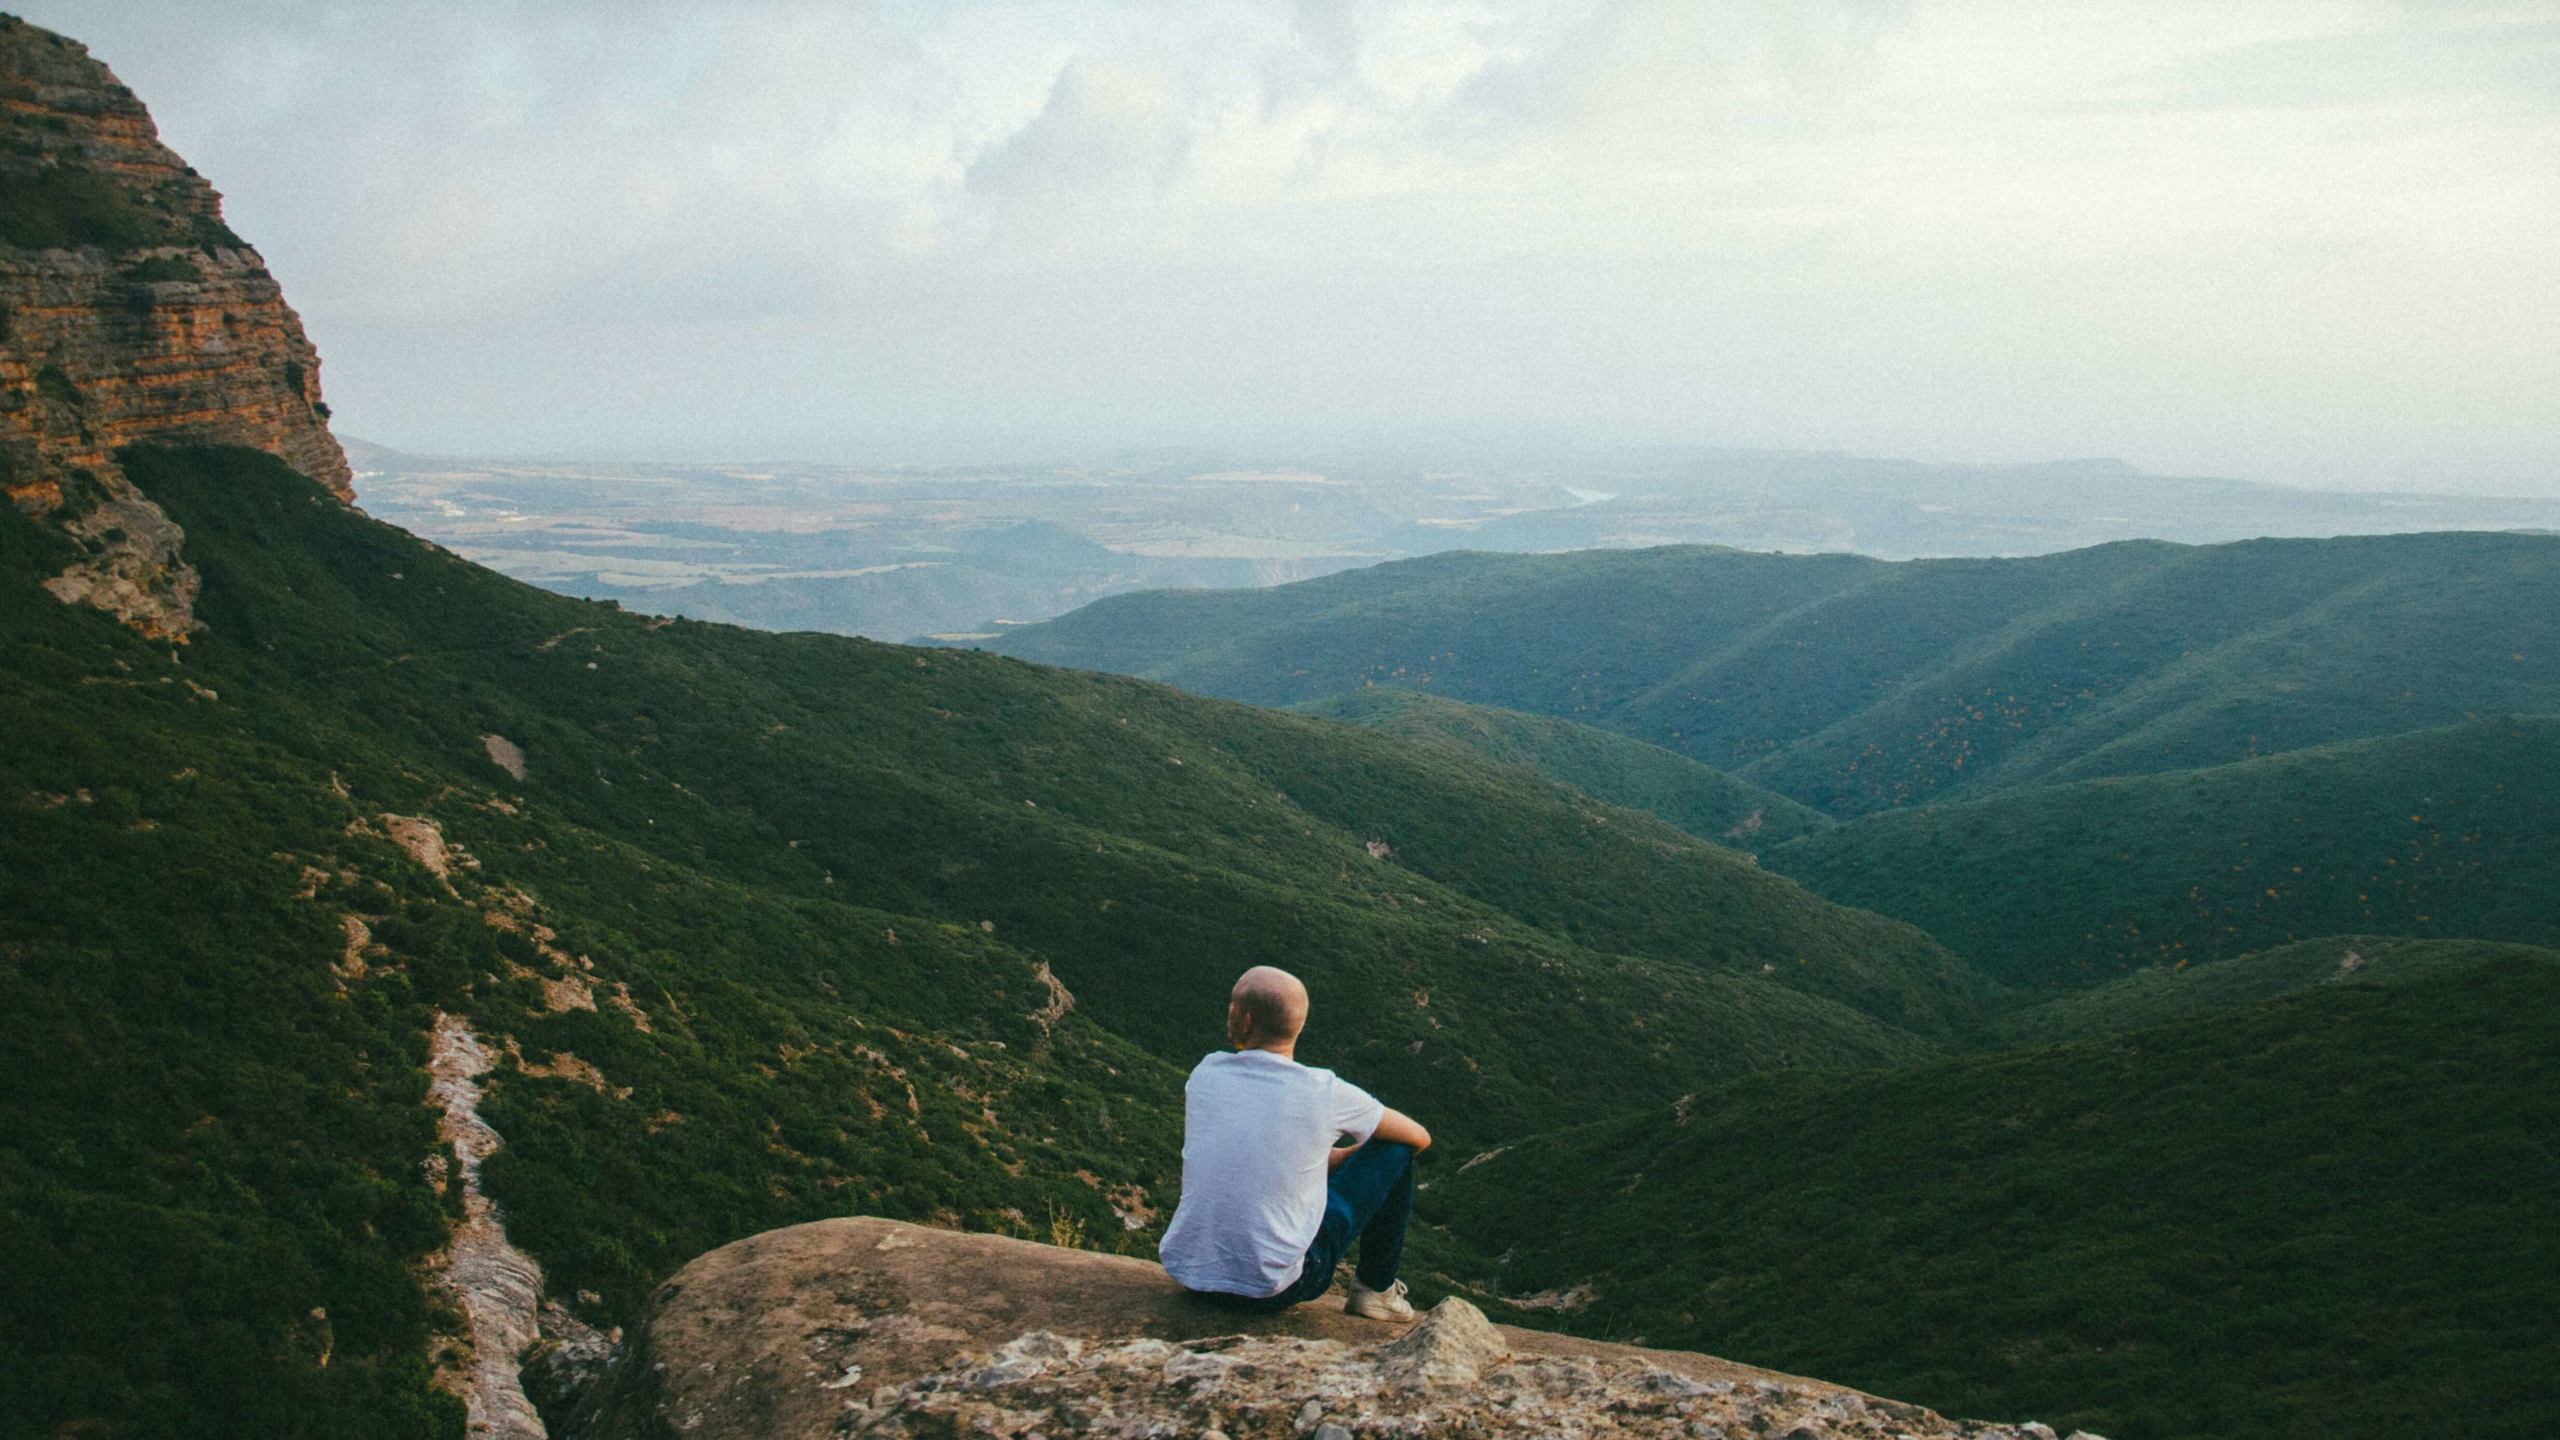 Image of a man sitting on rock overlooking a valley on a sunny day. Learn to manage your emotions with the help of empath counseling in Austin, TX.